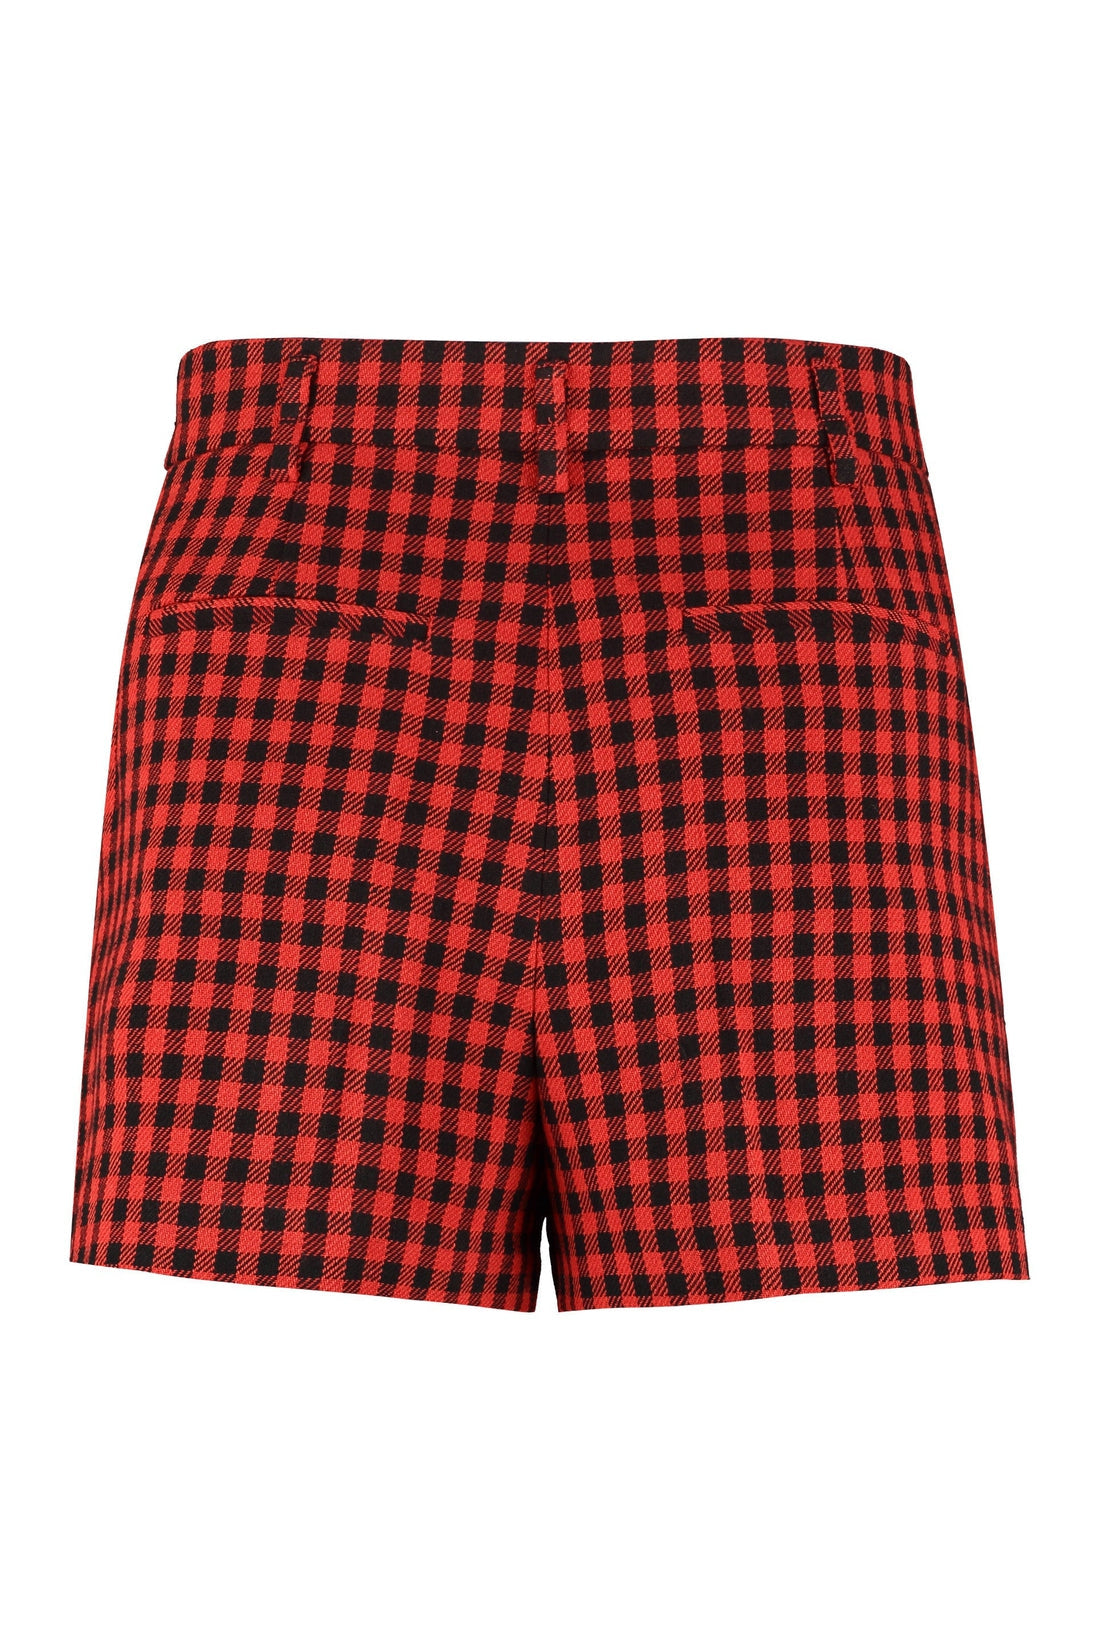 RED VALENTINO-OUTLET-SALE-High waist shorts-ARCHIVIST